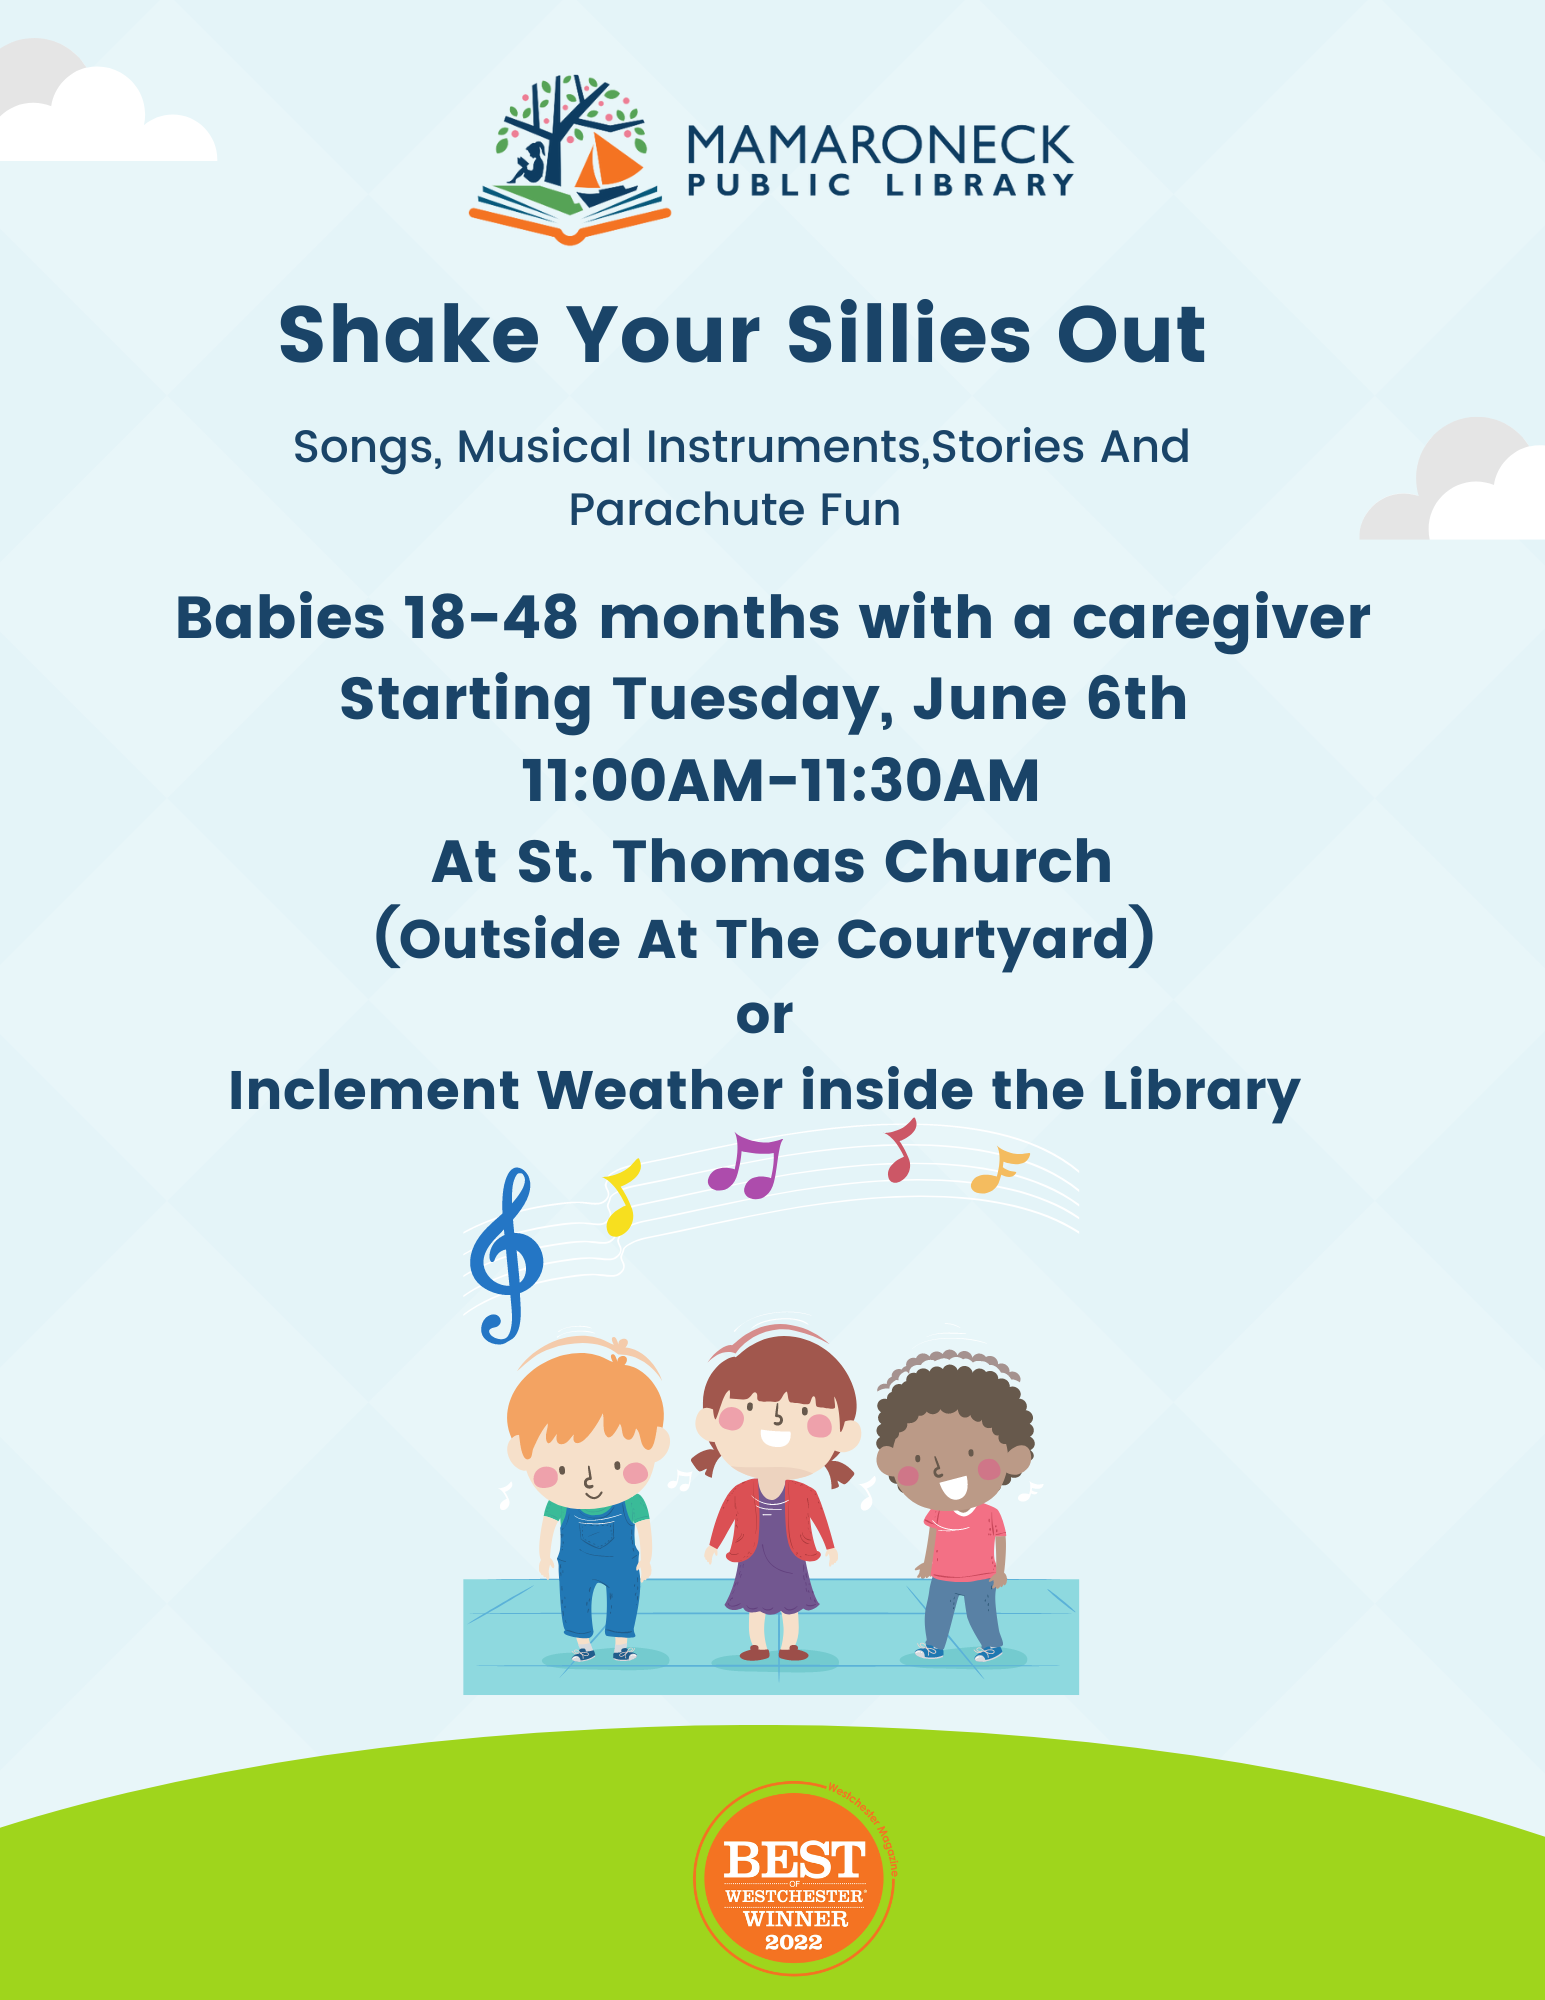 shake your sillies out - at st thomas church - kids 18-48 months old - if inclement weather, event held in Library